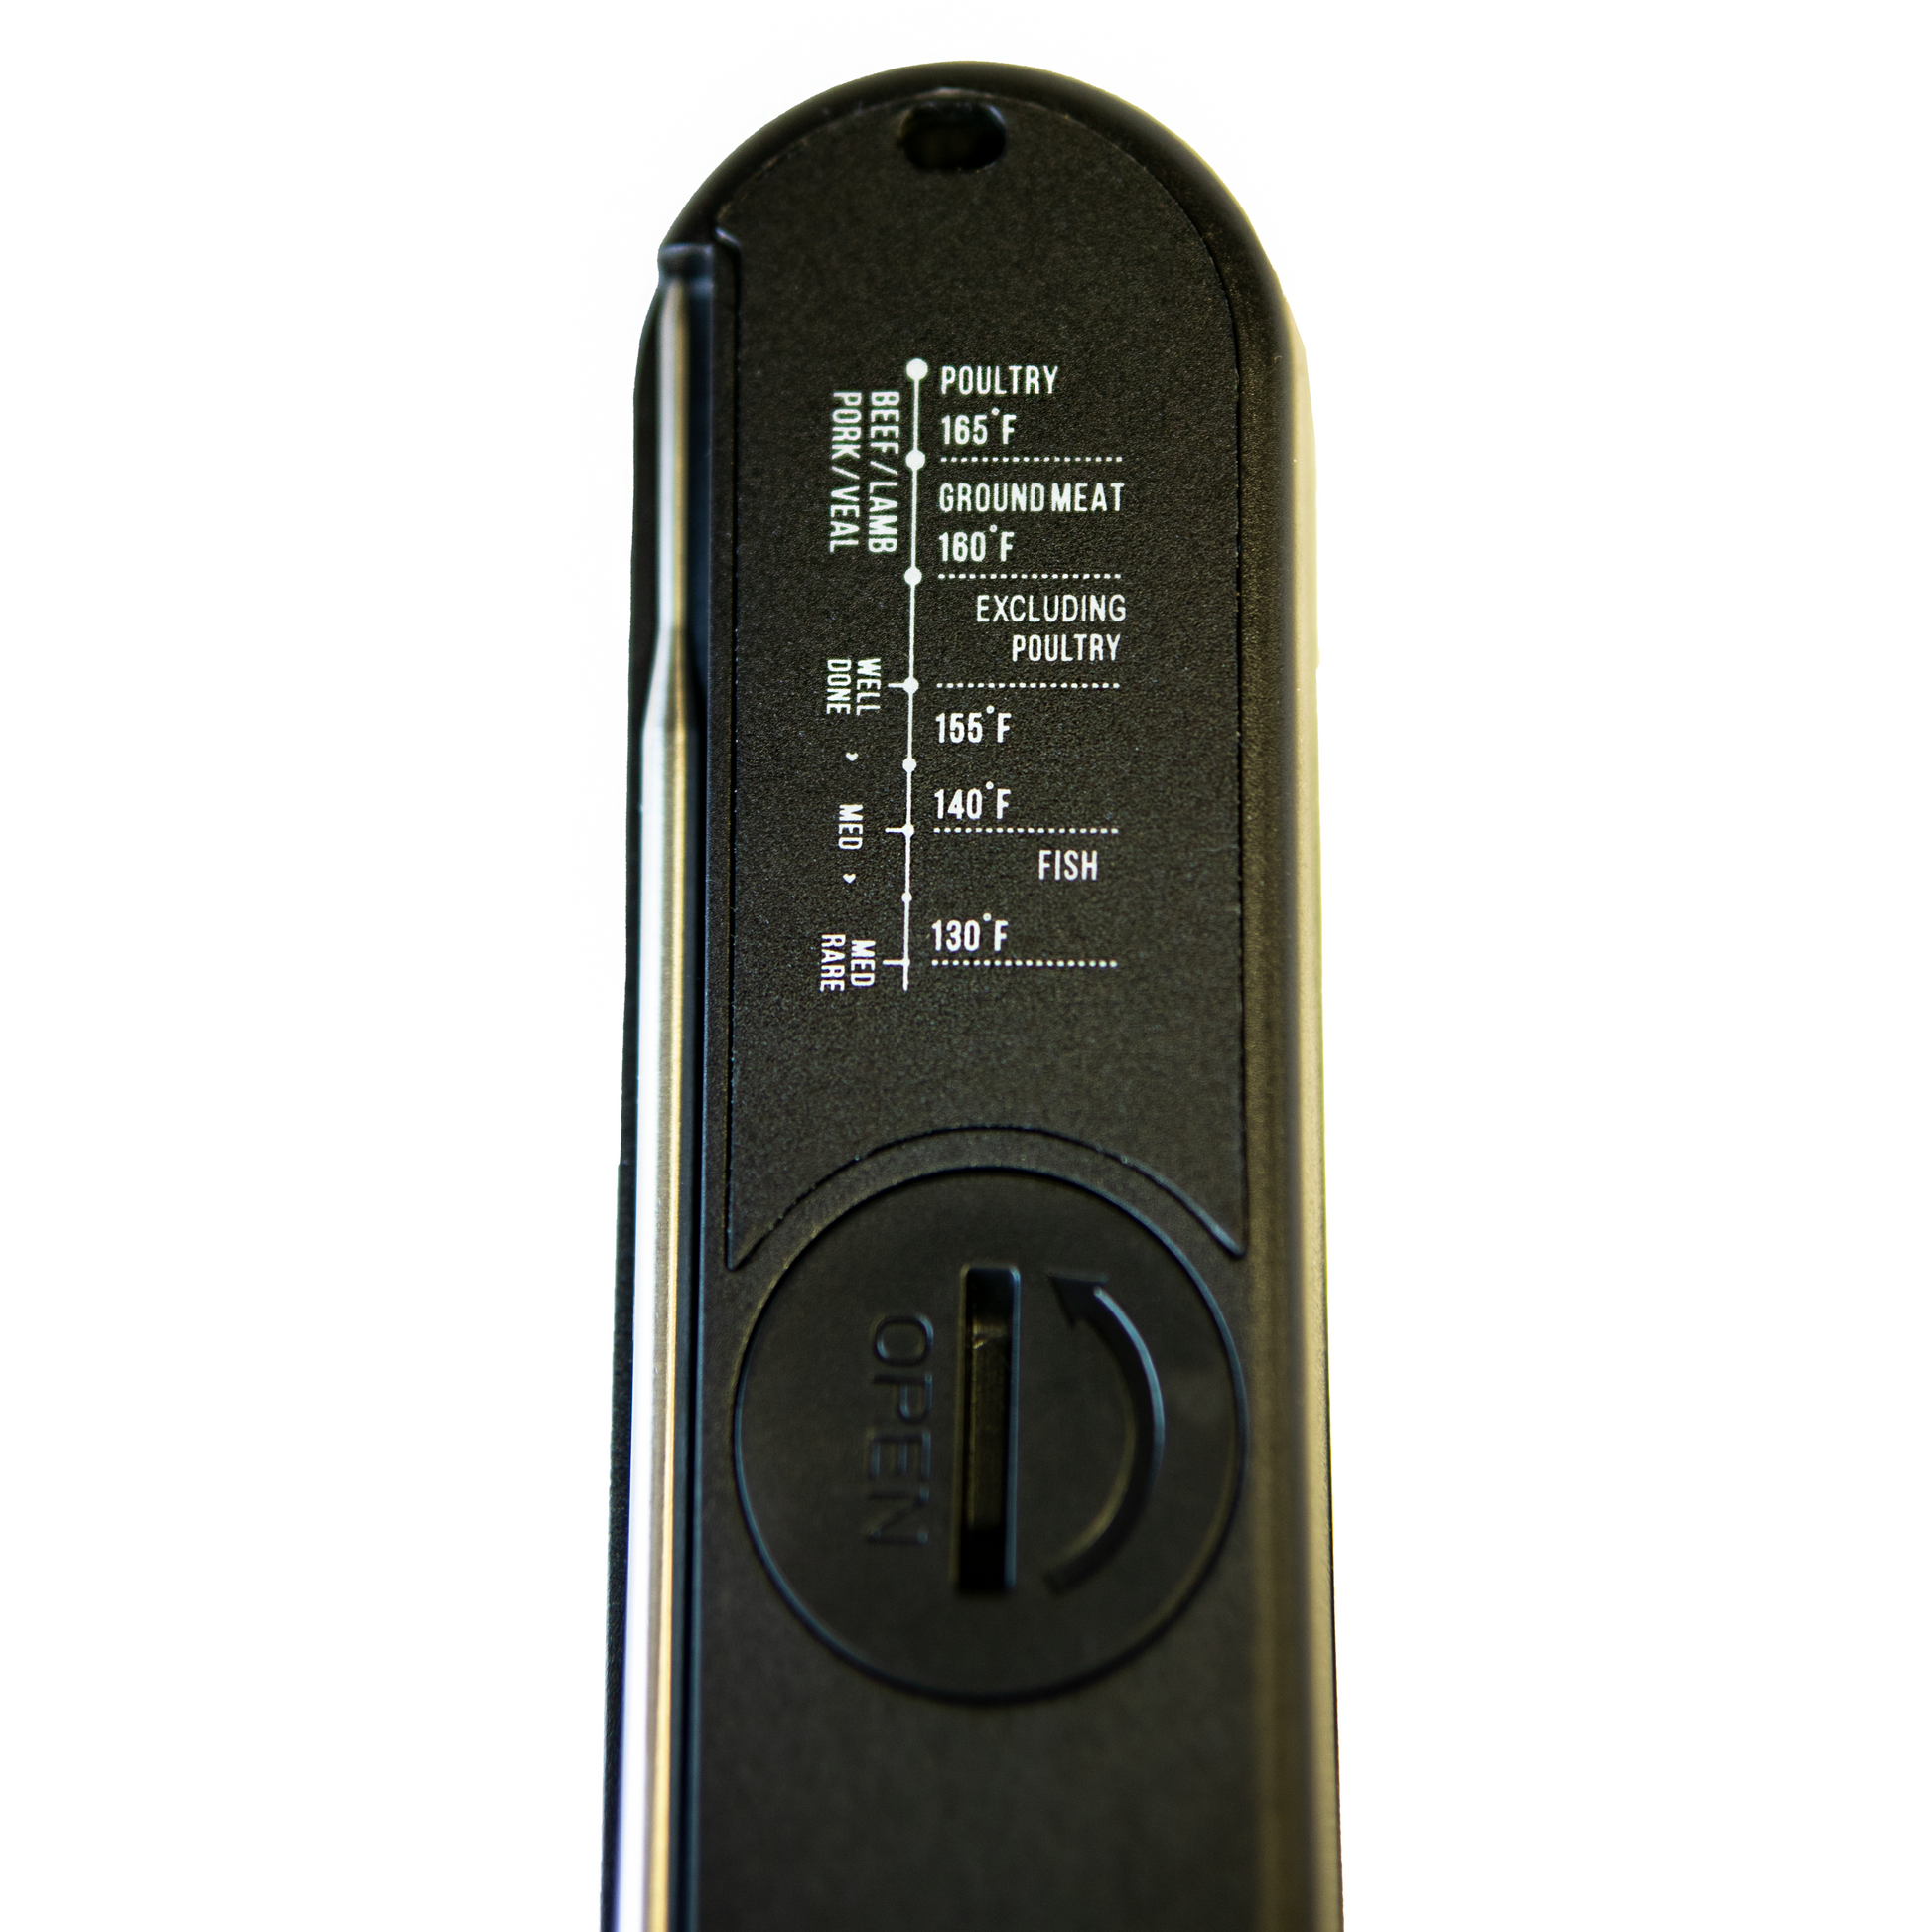 Brander Black Ops Digital Thermometer with Recommended Temperatures